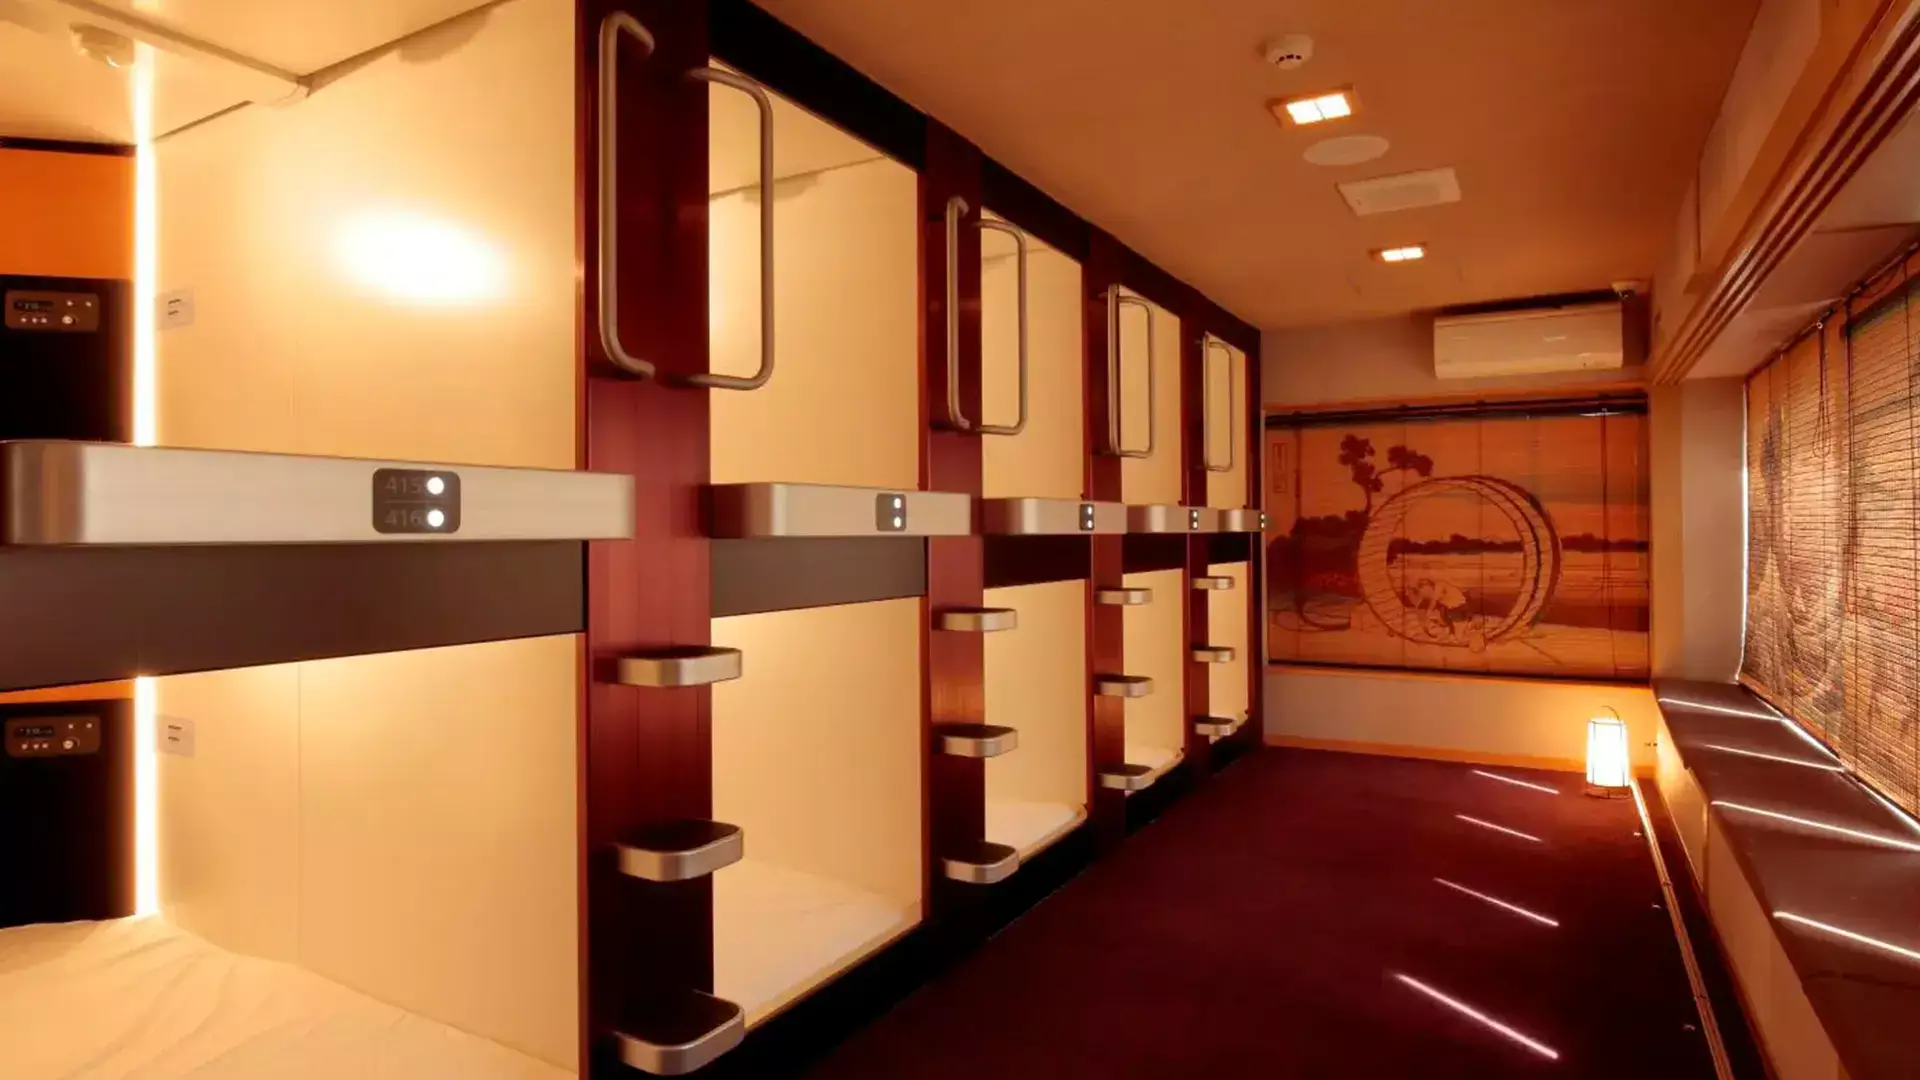 A guide to capsule hotels in Japan